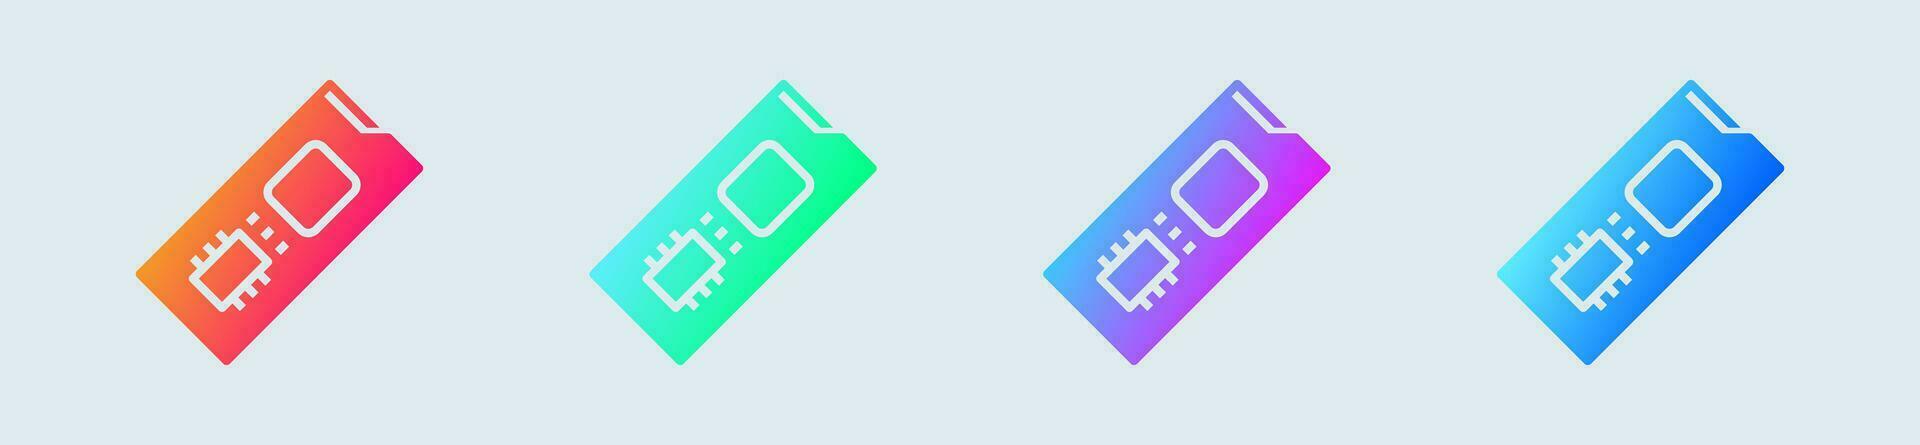 Ssd solid icon in gradient colors. Drive signs vector illustration.